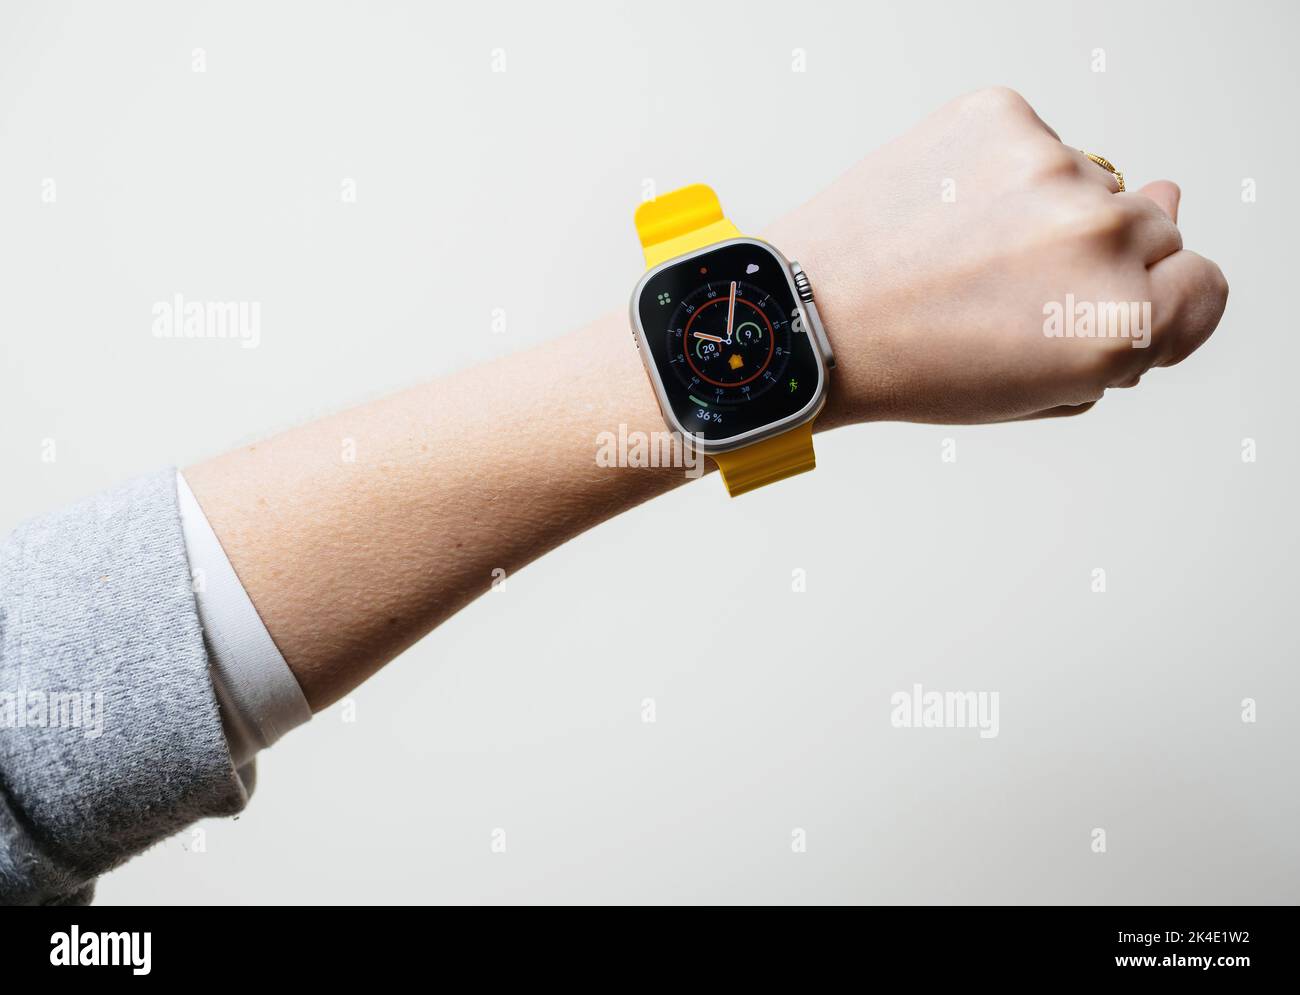 London, United Kingdom - Sept 28, 2022: Powerful woman holding Apple Computers Apple Watch Ultra wearable on her wrist white background Stock Photo